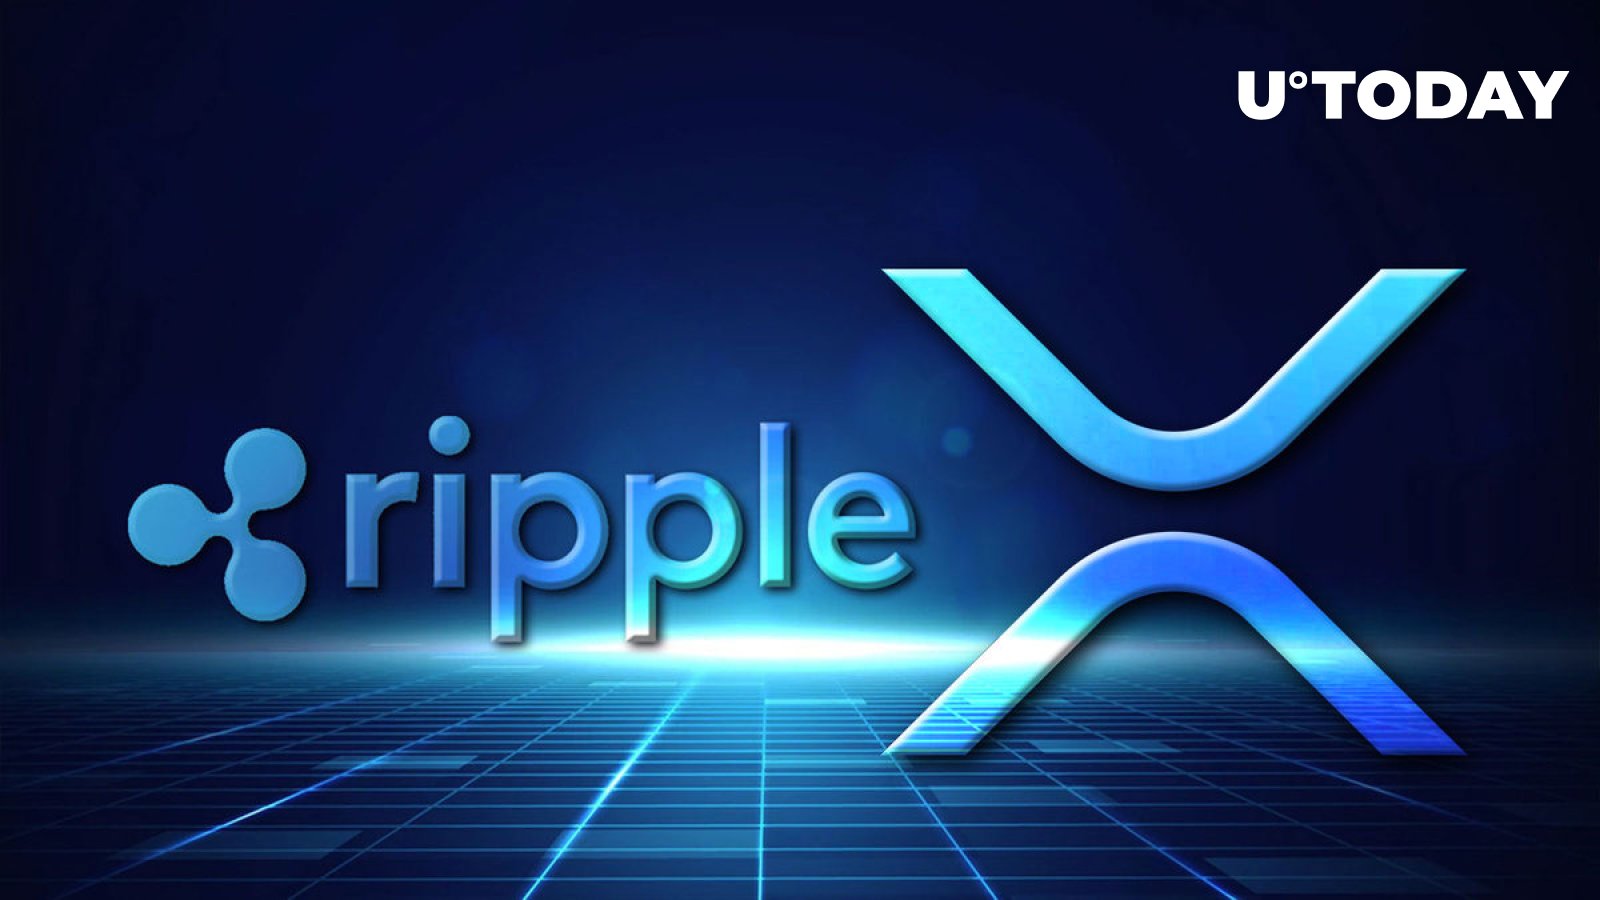 Ripple Sold 6 Million Worth of XRP in Q4, Here Are Other Key Insights